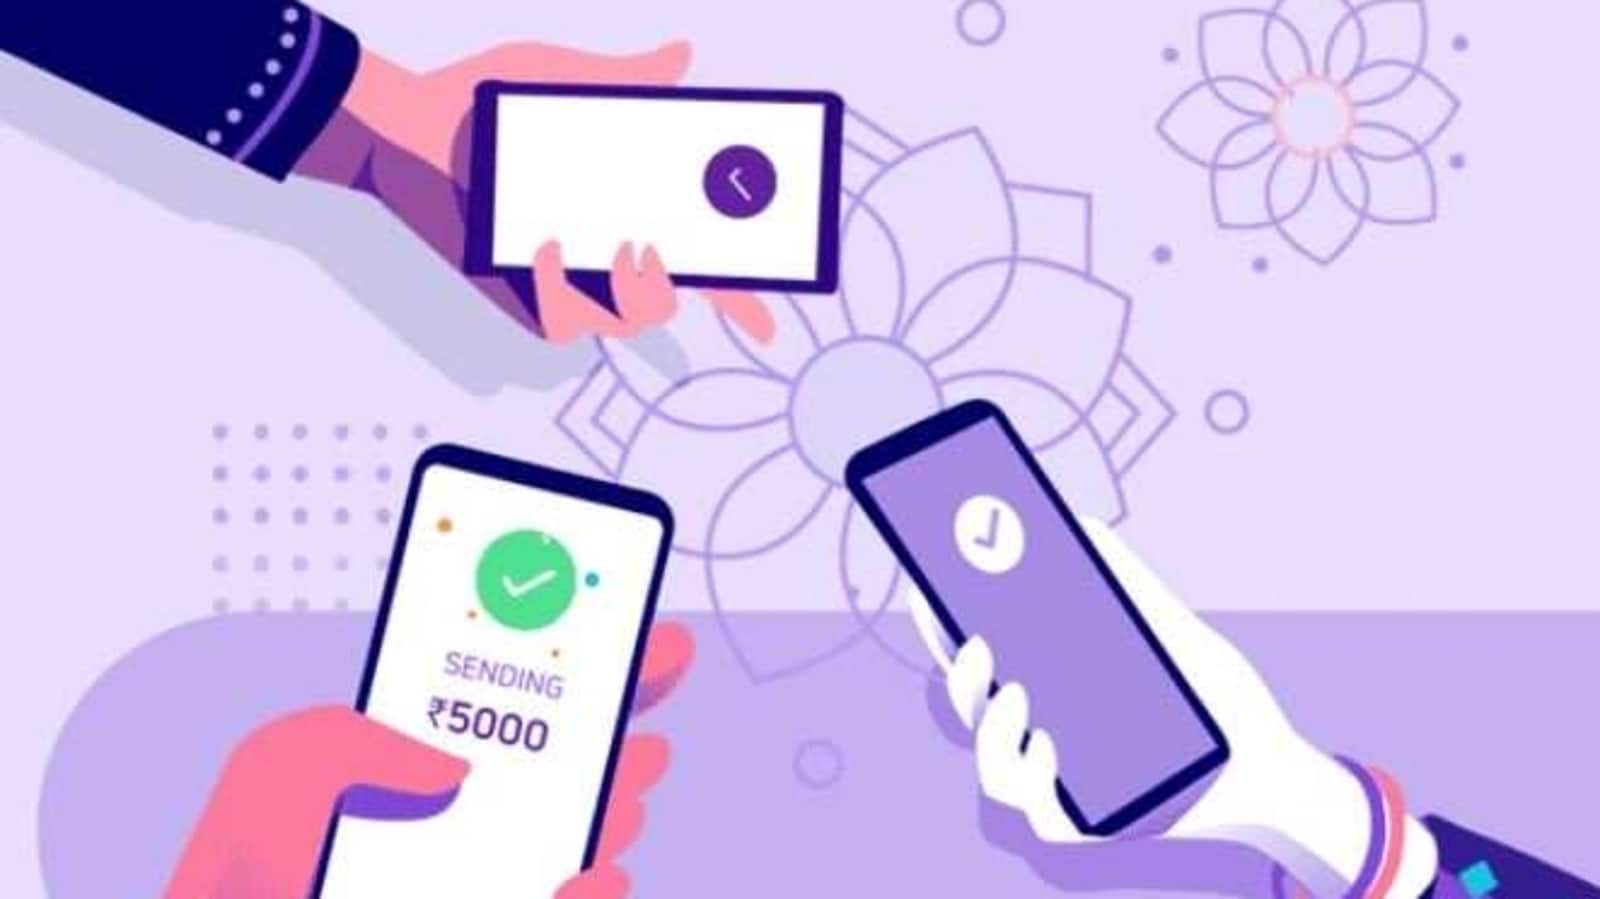 Indians staying in UAE can now make UPI payments using PhonePe app